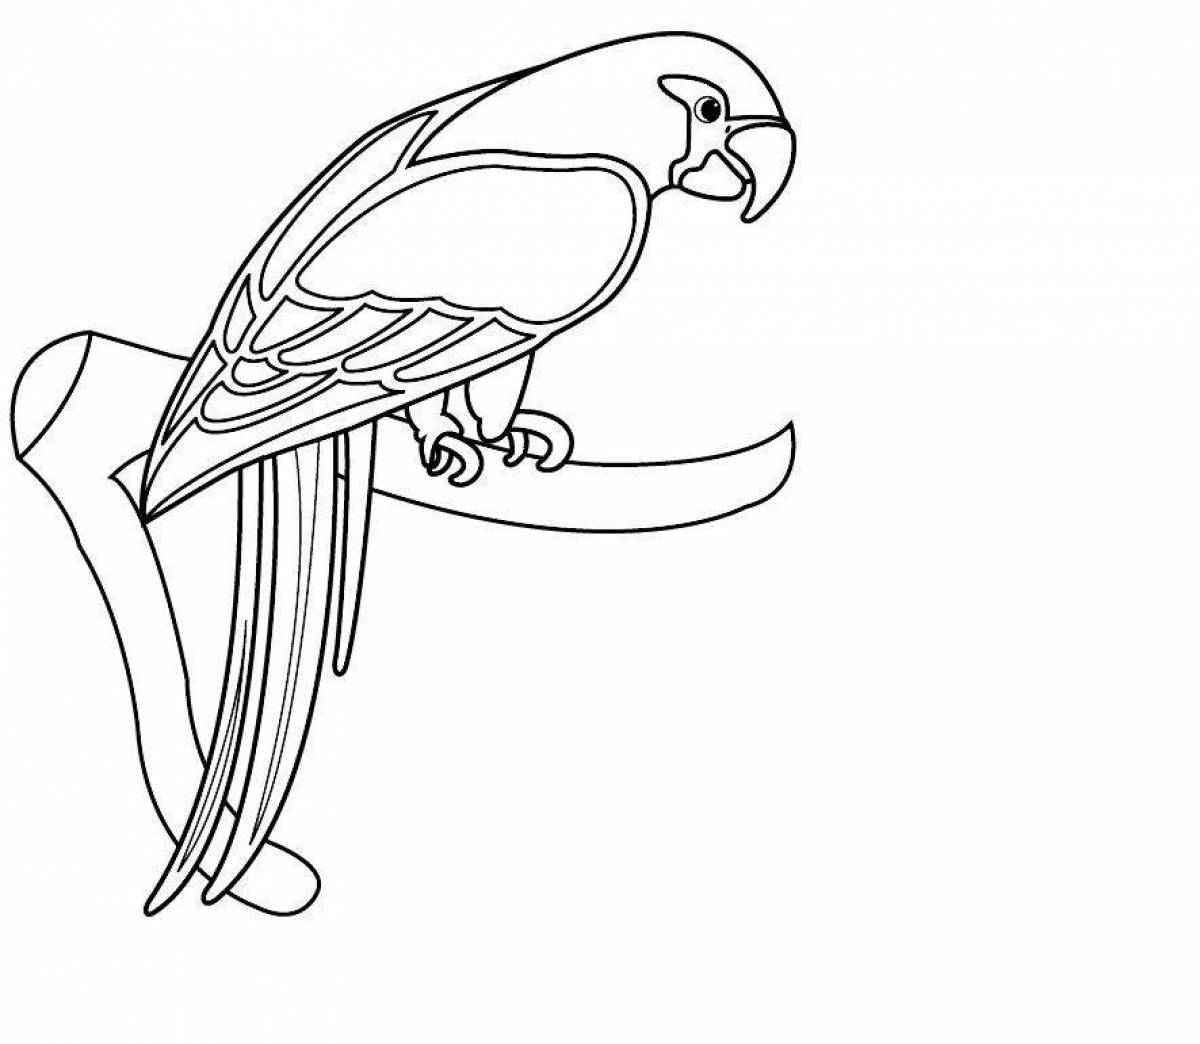 Live macaw parrot coloring book